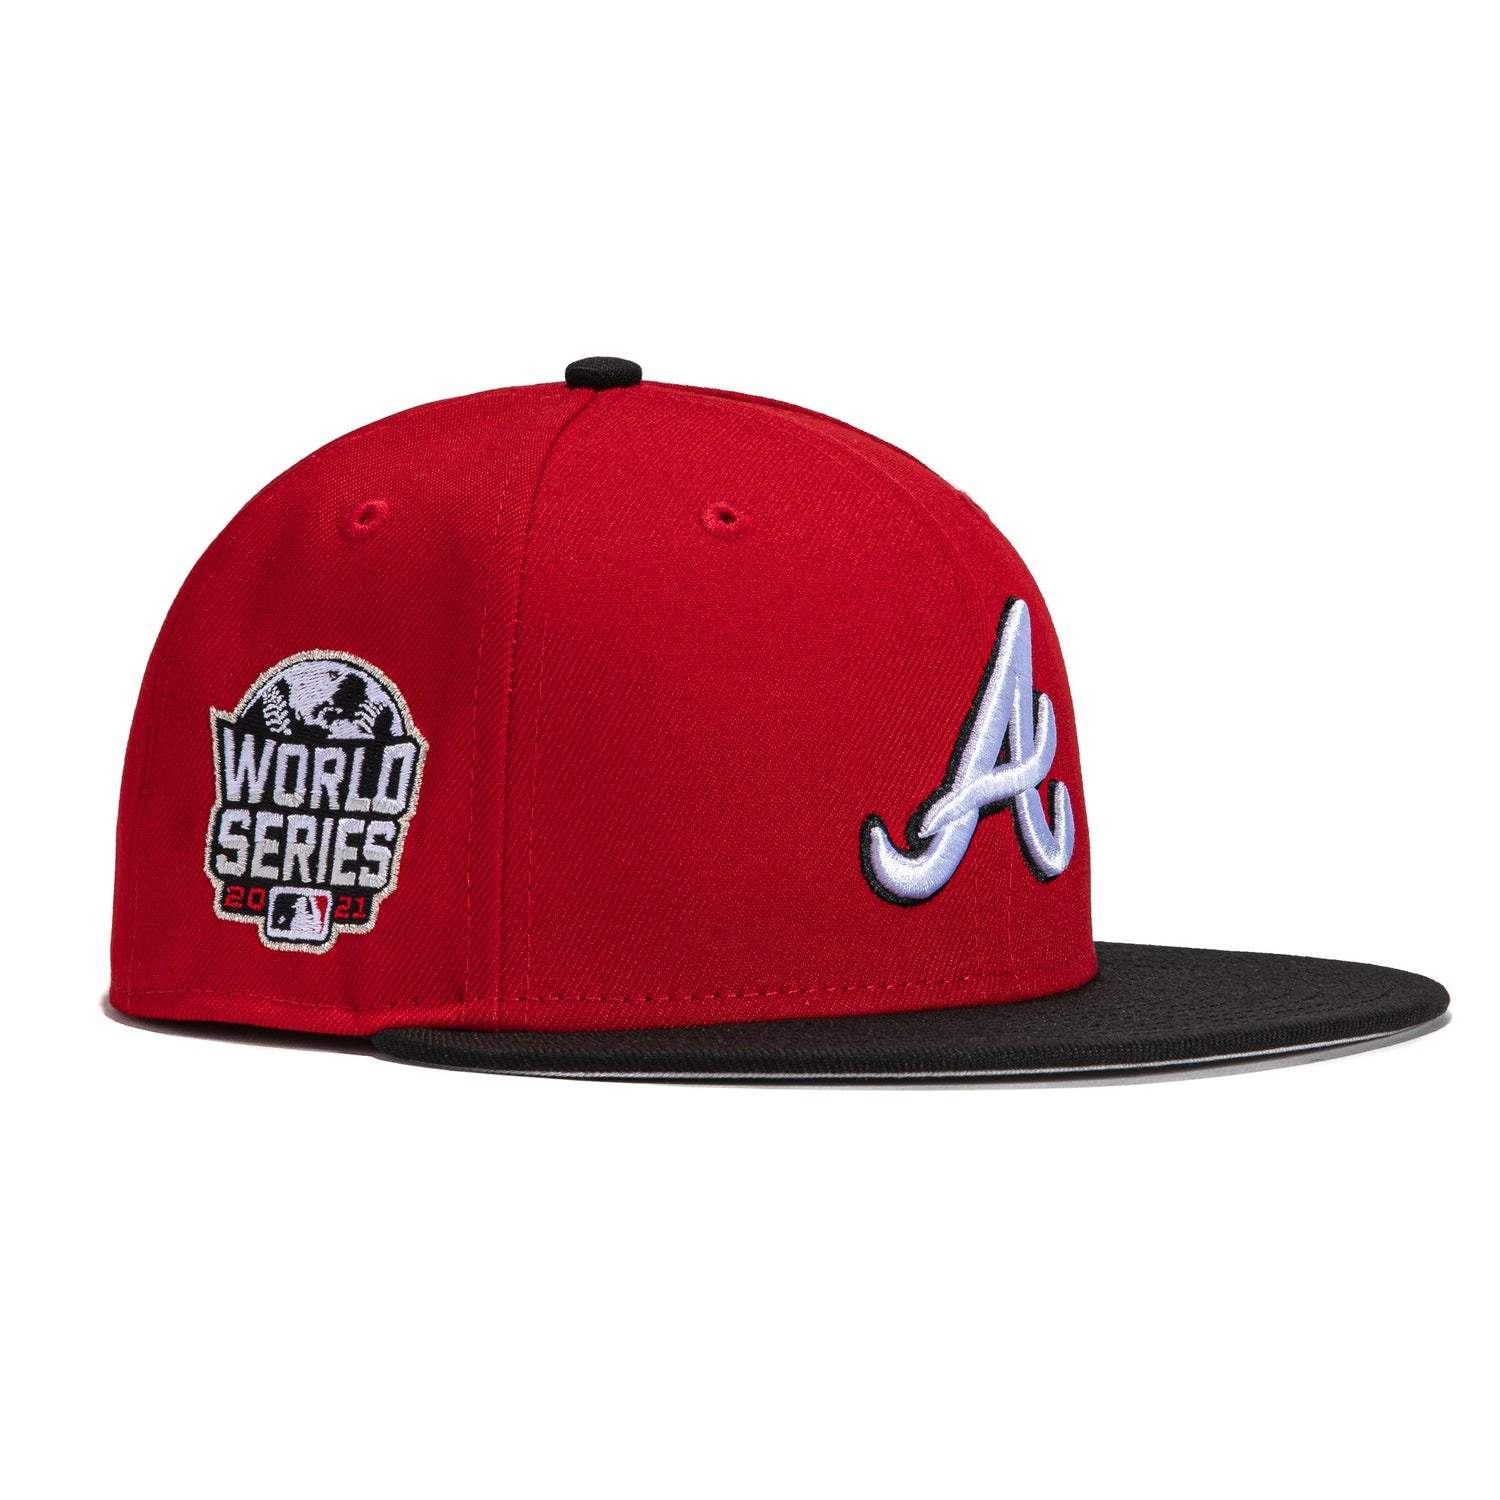 New Era 59Fifty Atlanta Braves 2021 World Series Patch Hat - Red